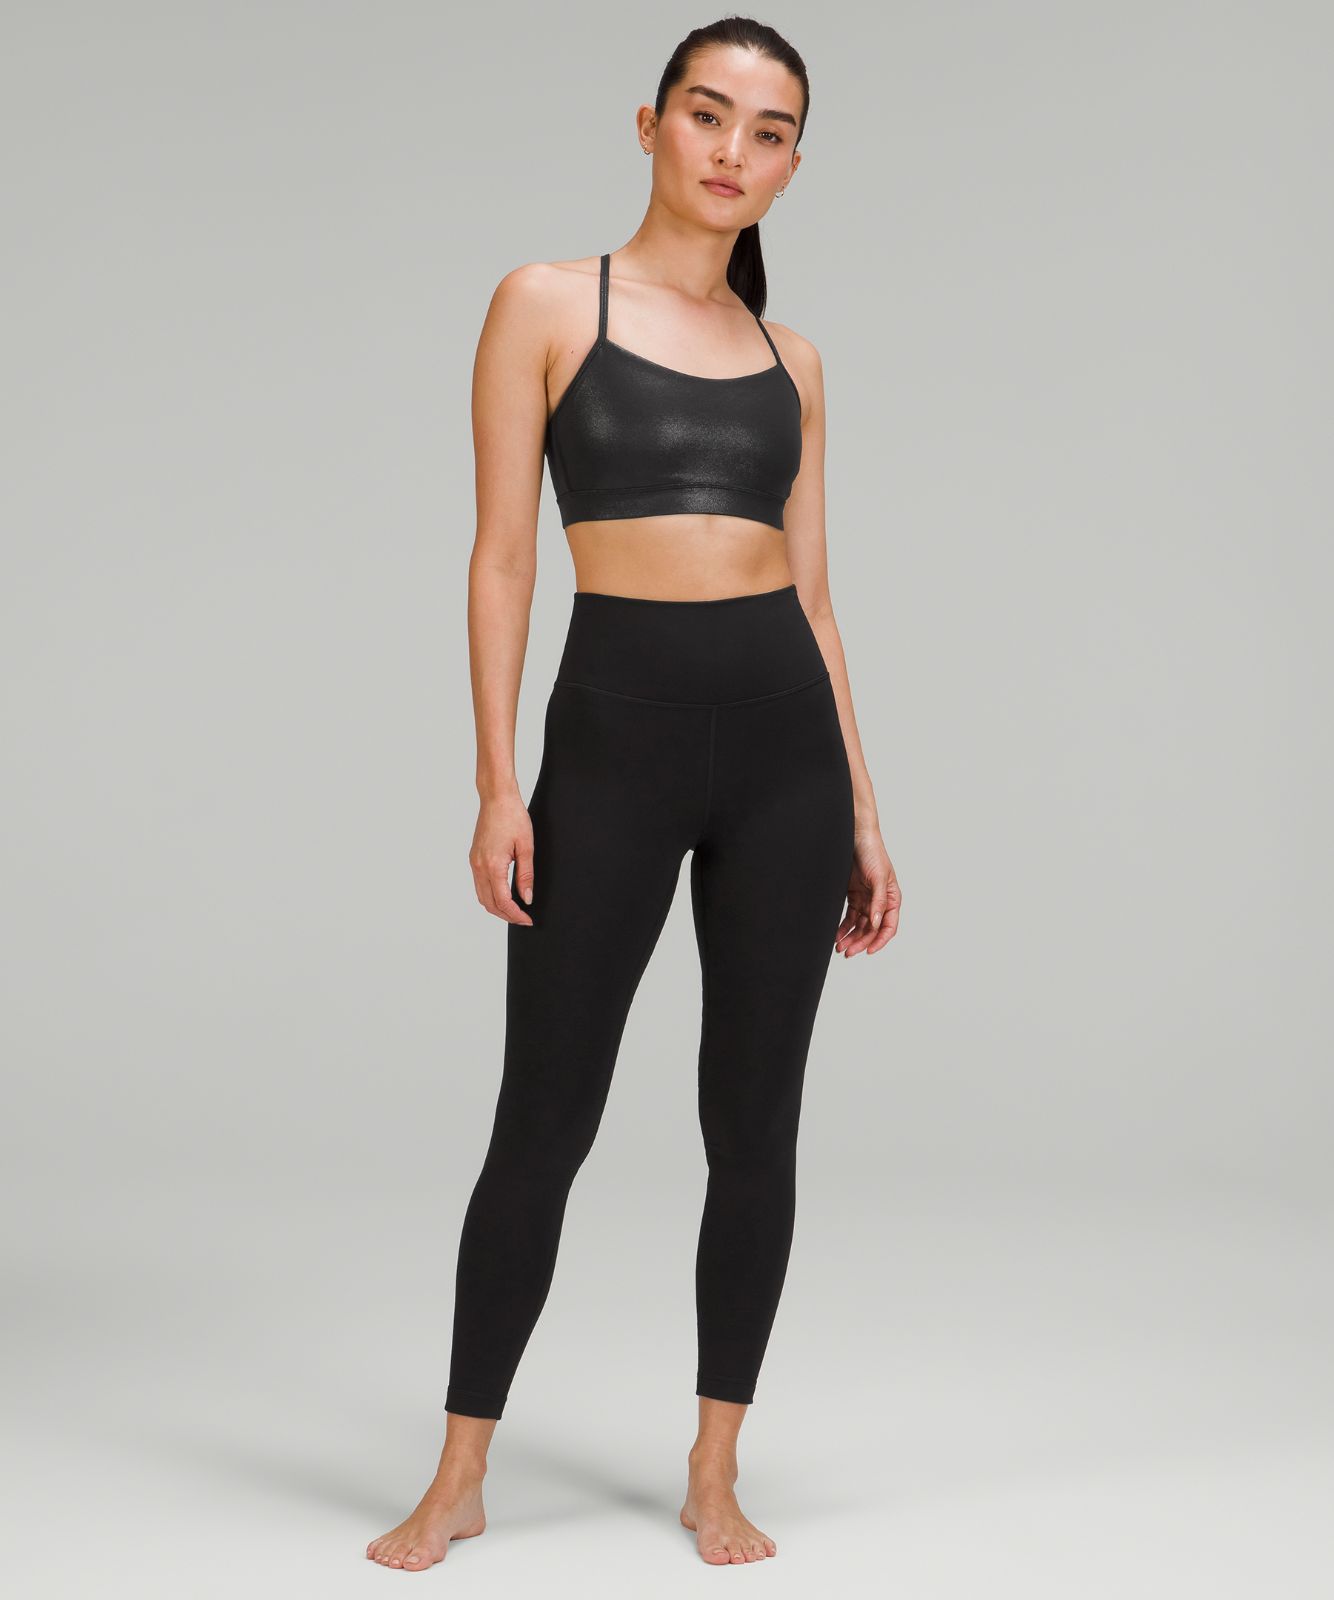 Flow Y Bra Nulu Shine *Light Support, B/C Cup Asia Fit